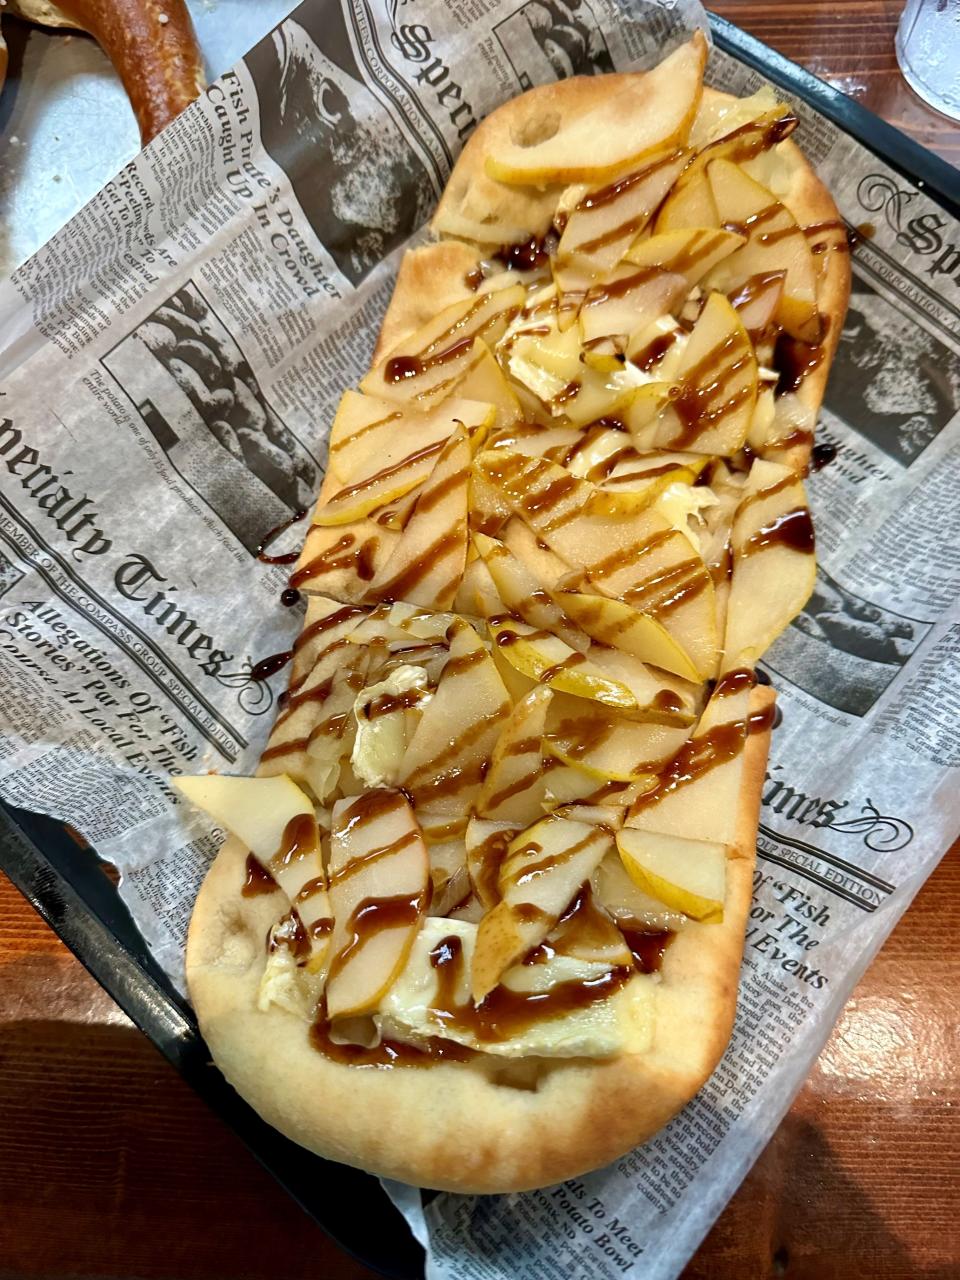 The Pear & Brie flatbread at Tin Whiskey Southern Kitchen and Still in Cocoa Village is topped with brie, onions and thinly sliced, fresh pears, all baked in a brick oven, then drizzled with balsamic reduction.